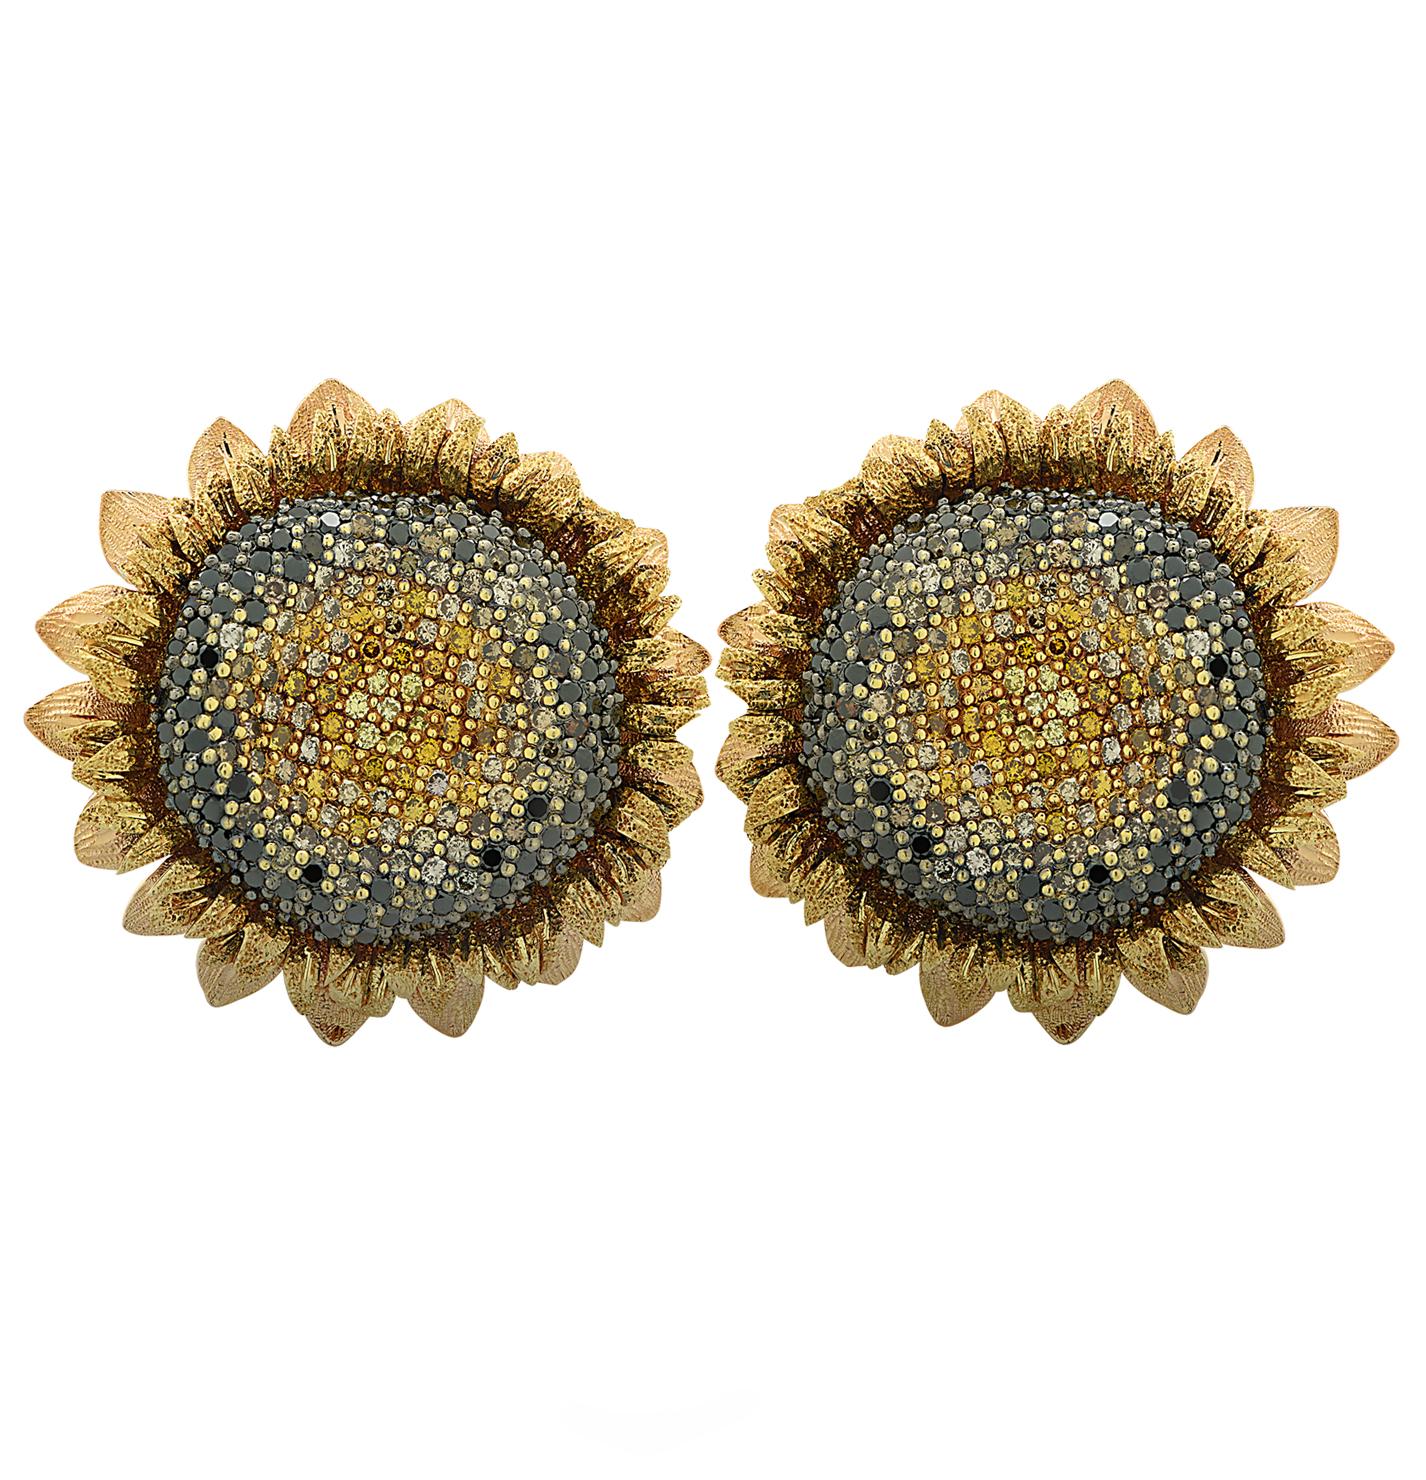 Sensational Alex Soldier Sunflower Earrings crafted in 18 karat yellow and rose gold, featuring 392 mixed color round brilliant cut diamonds weighing approximately 4 carats total. Diamonds ranging in hue from white, champagne, cognac, brown orange,